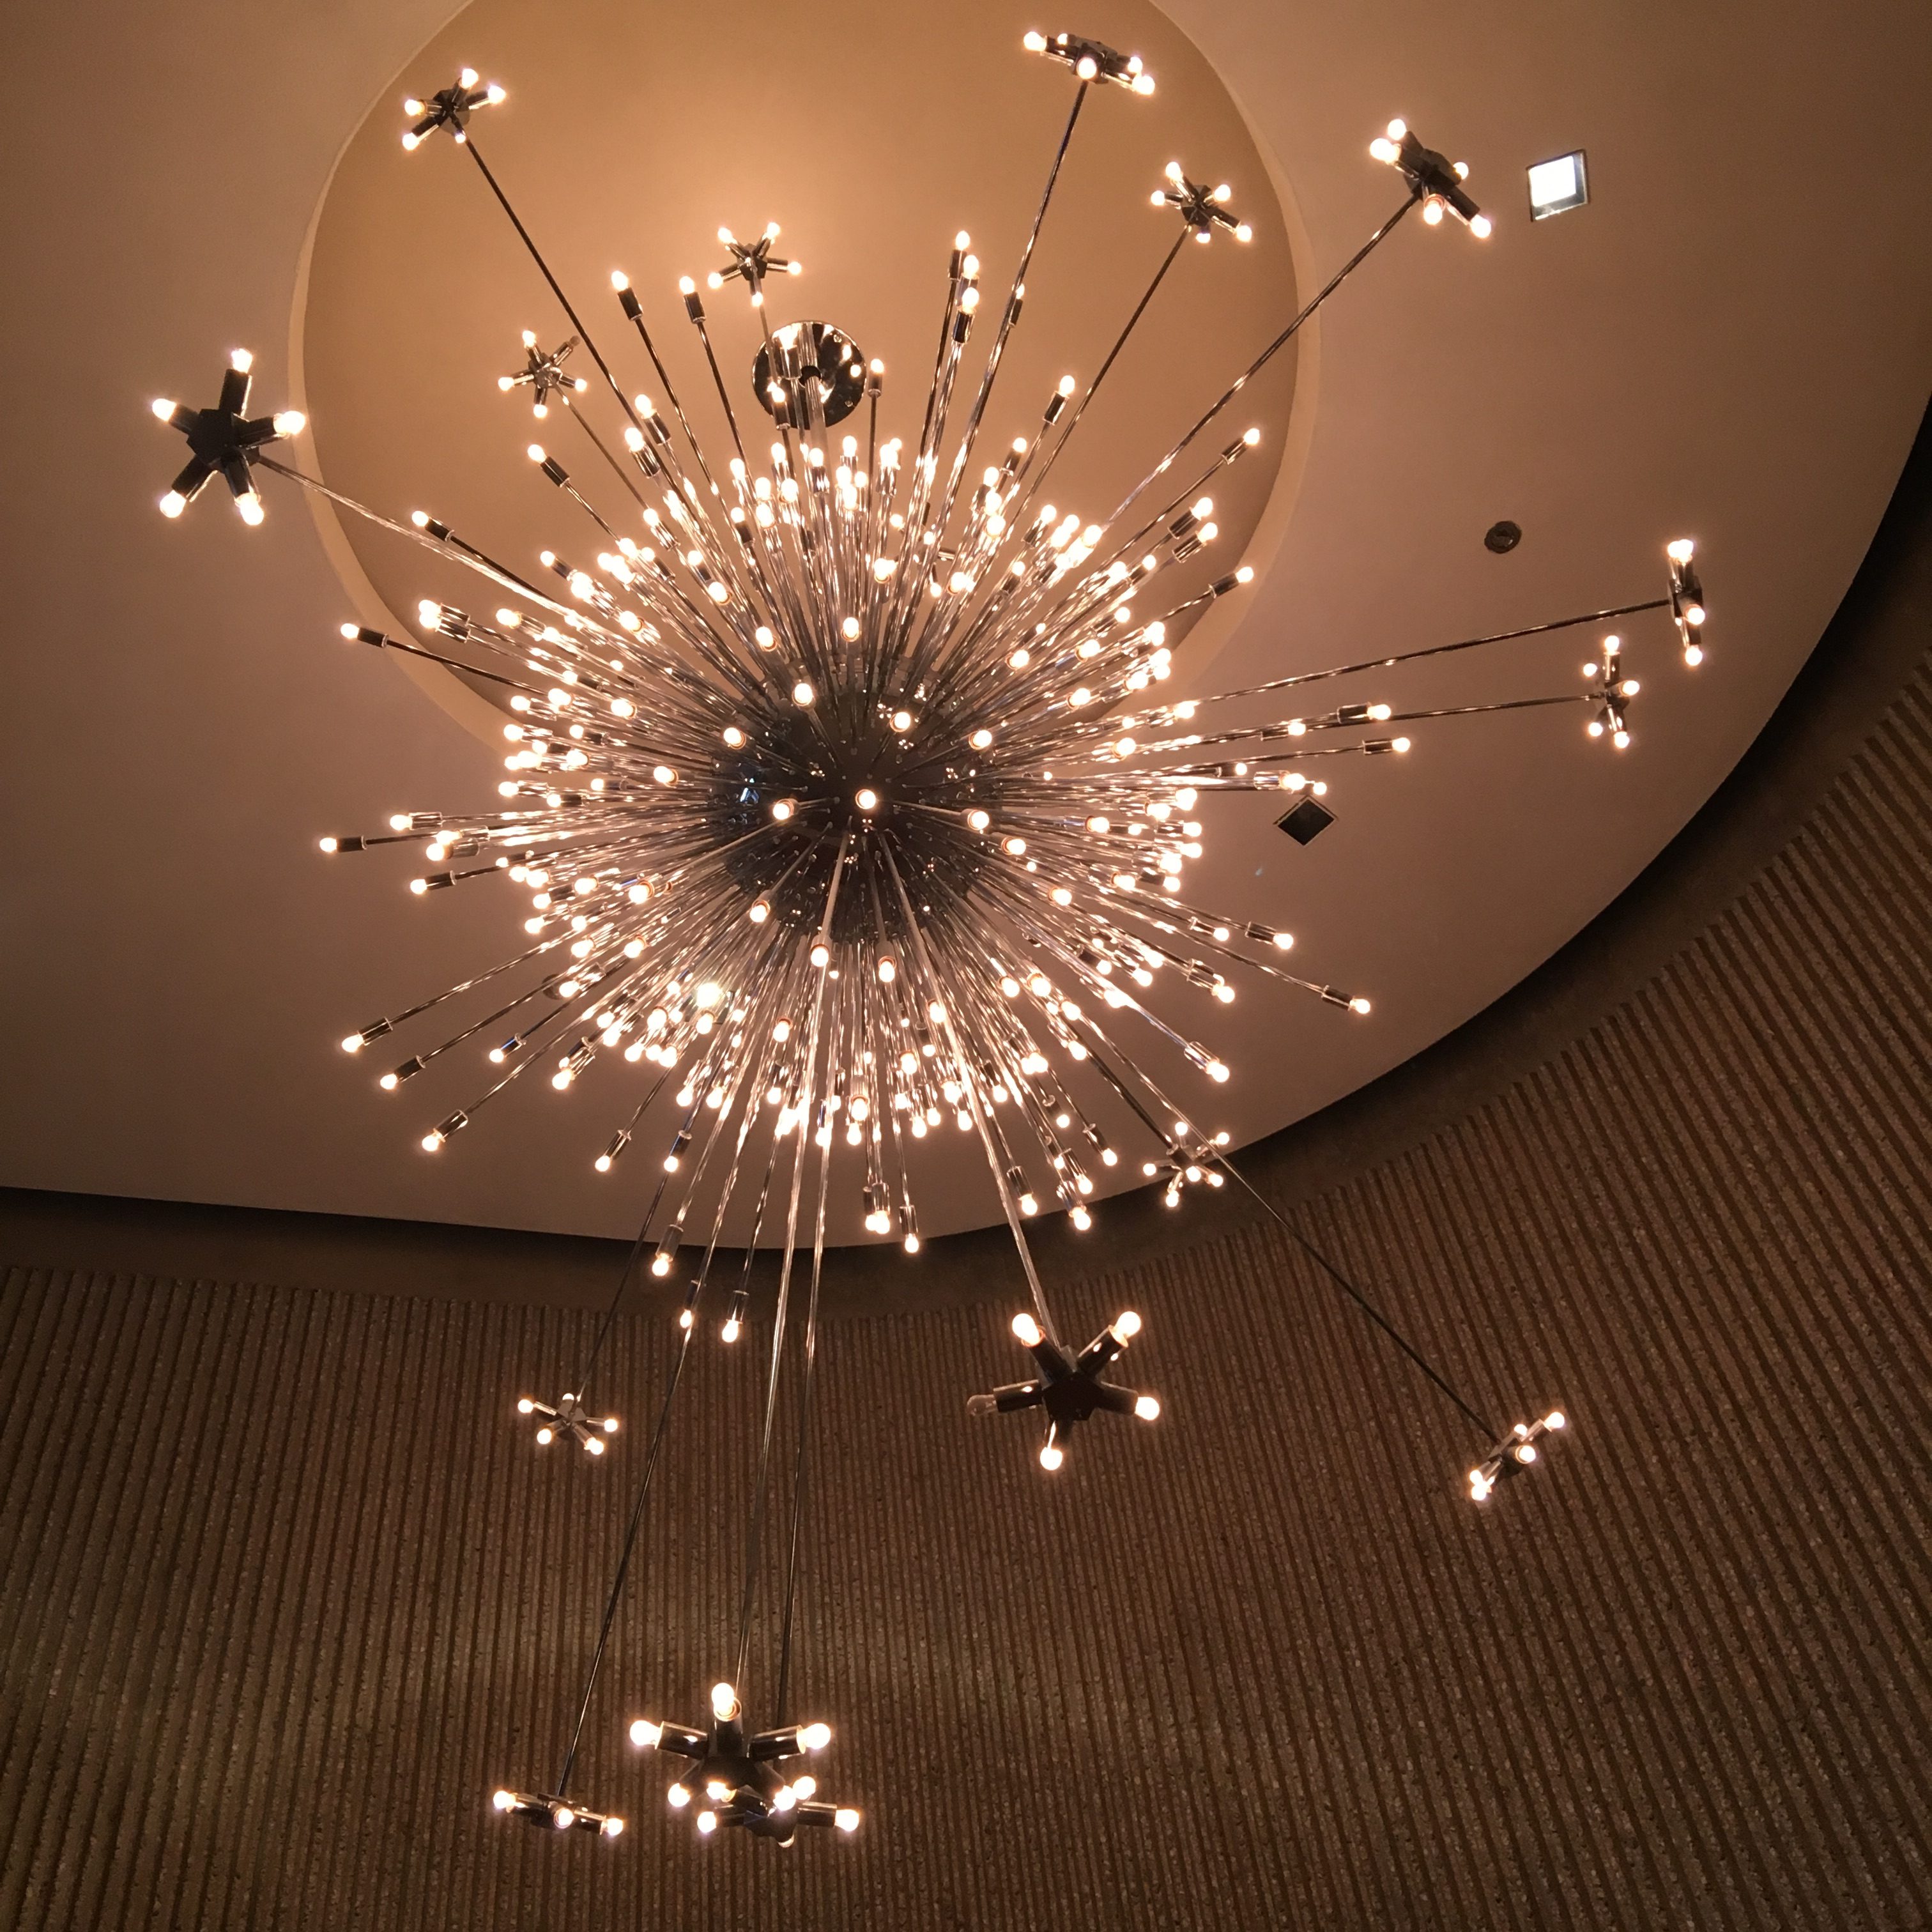 Marjorie Edris Chandelier with its 365 bulbs at the Palm Springs Art Museum